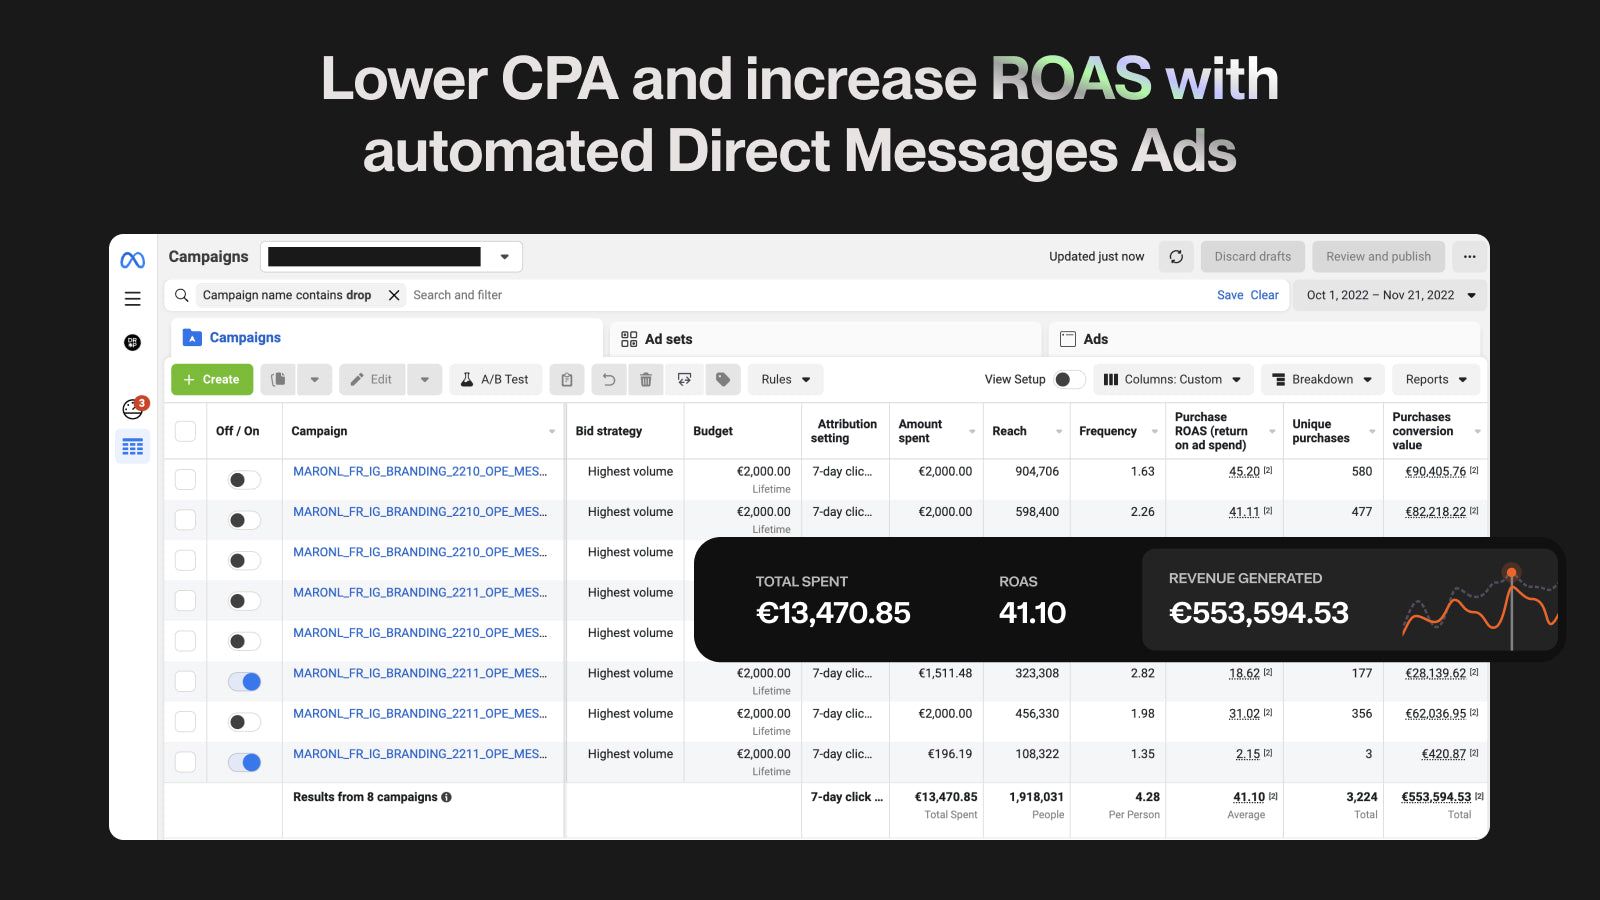 Lower CPA and increase ROAS